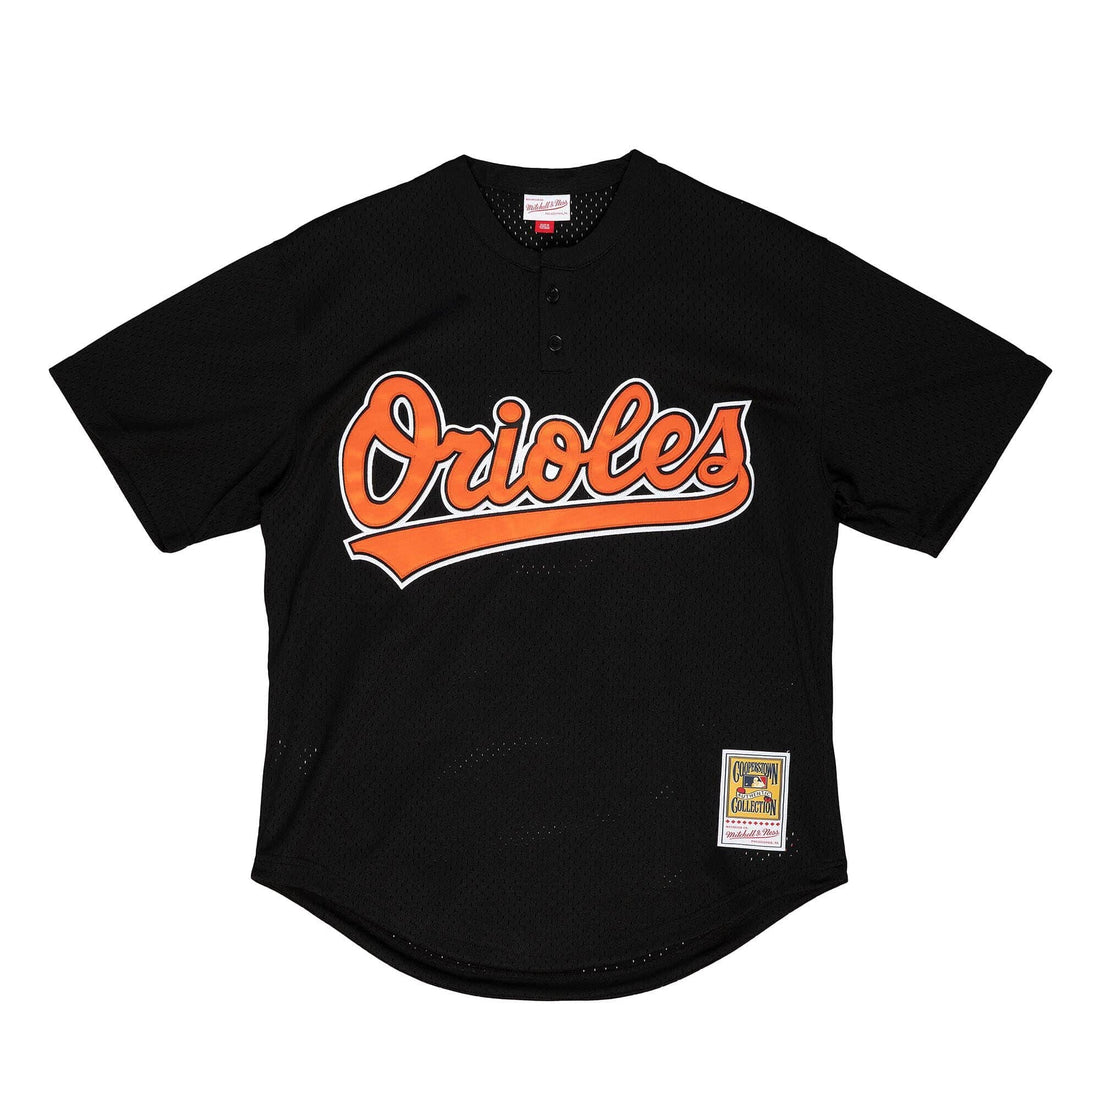 NEW MITCHELL AND NESS BALTIMORE ORIOLES CAL RIPKEN AUTHENTIC JERSEY 2XL